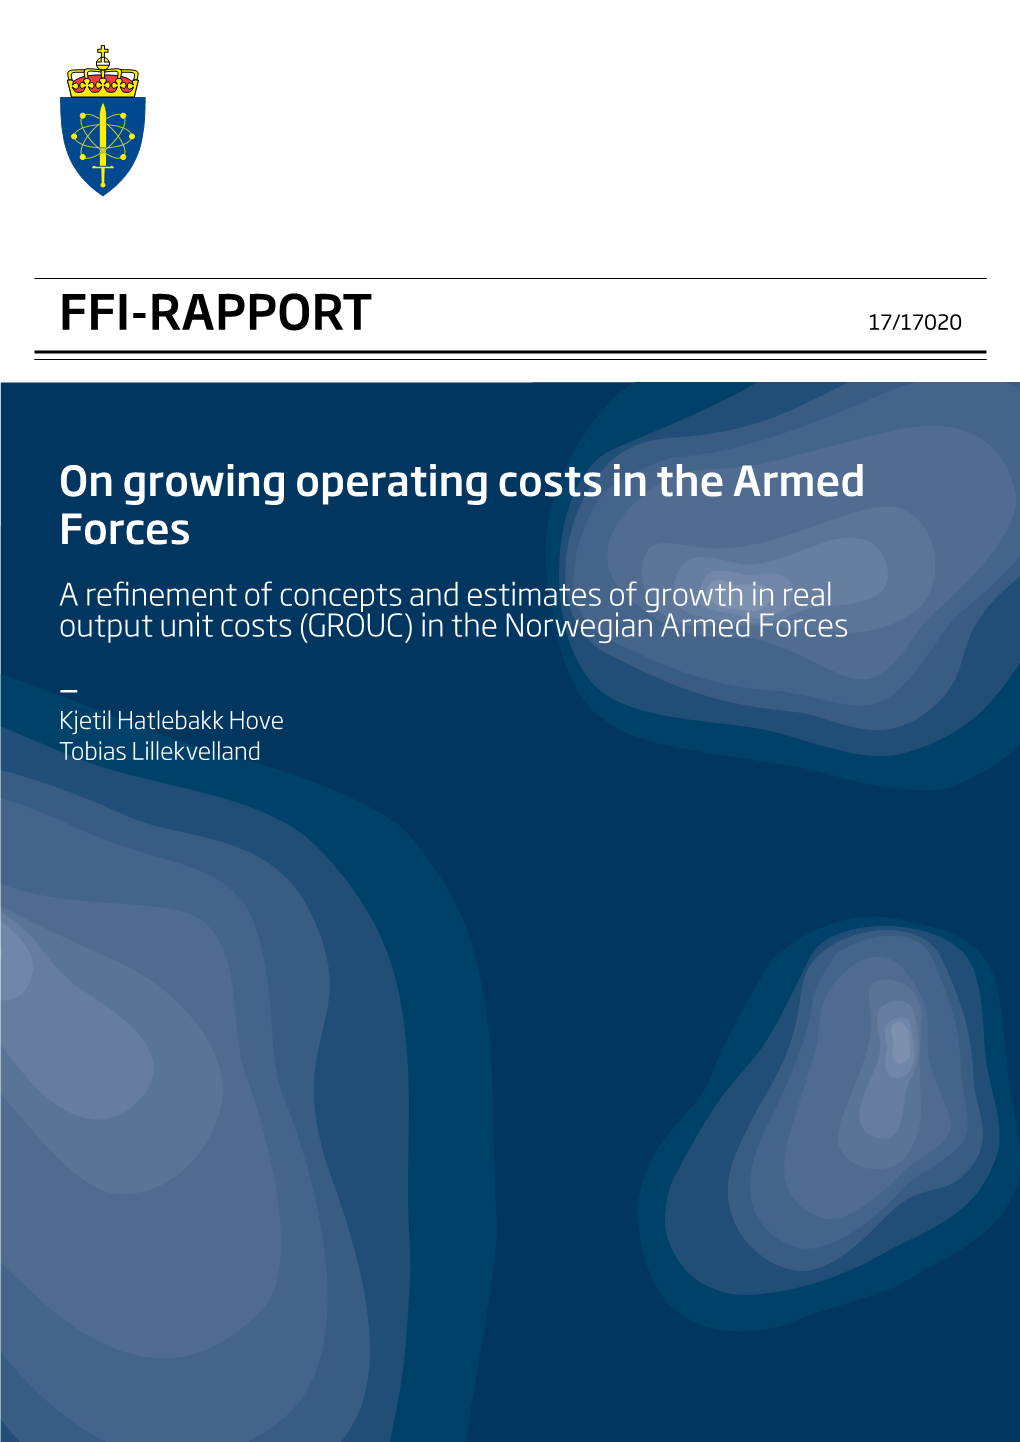 On Growing Operating Costs in the Armed Forces a Refinement of Concepts and Estimates of Growth in Real Output Unit Costs (GROUC) in the Norwegian Armed Forces